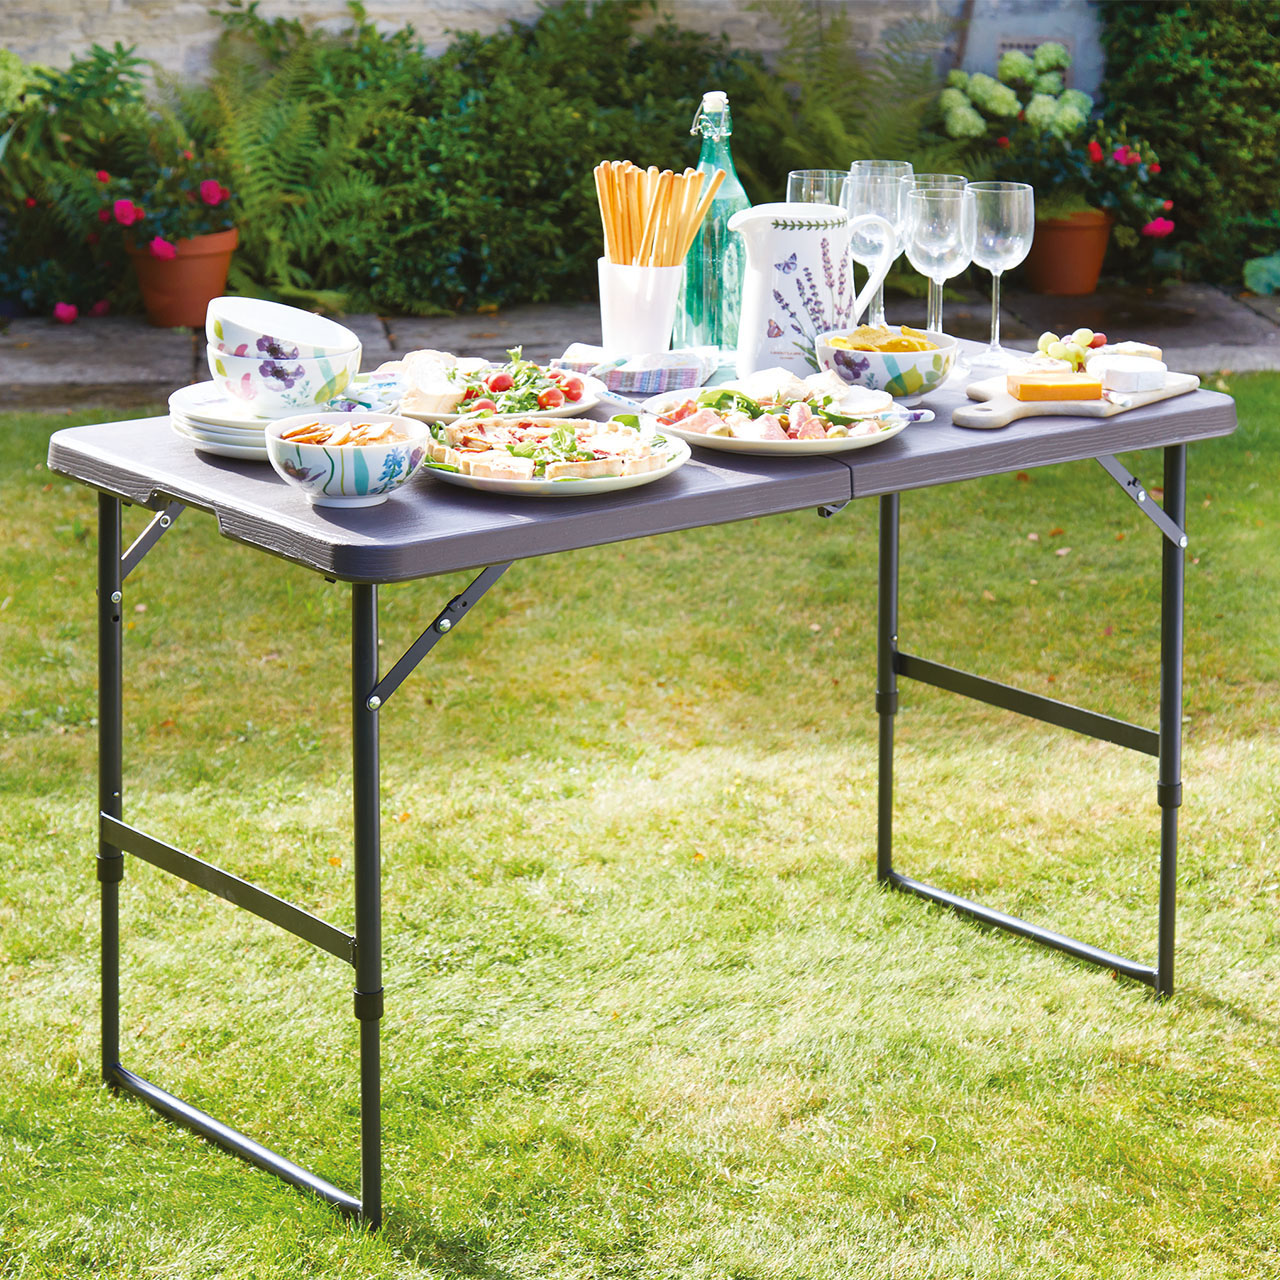 Extra Strong and Adjustable Height Foldaway Table